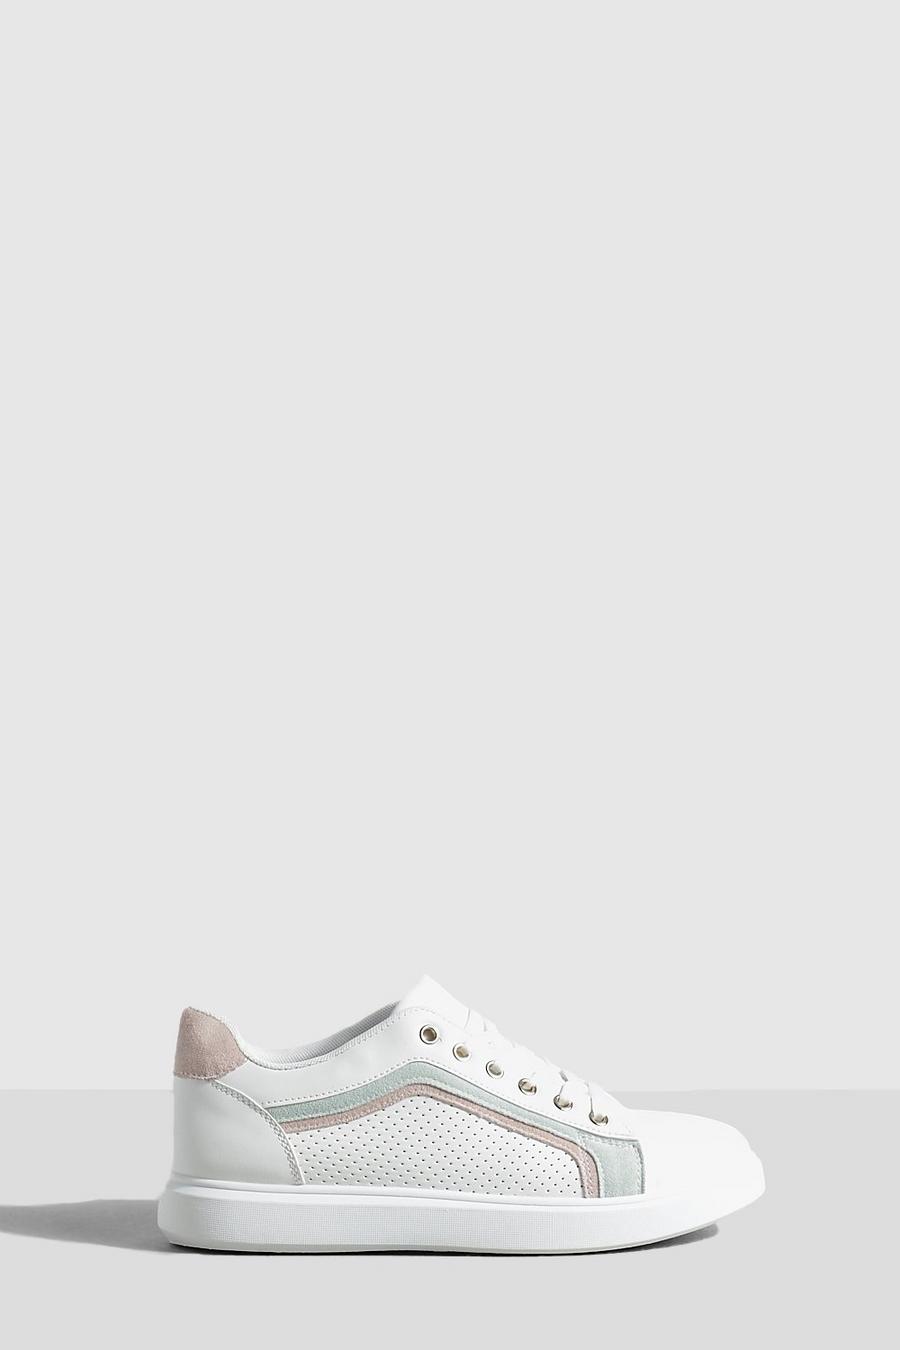 White_nude Contrast Stripe Lace Up Sneakers